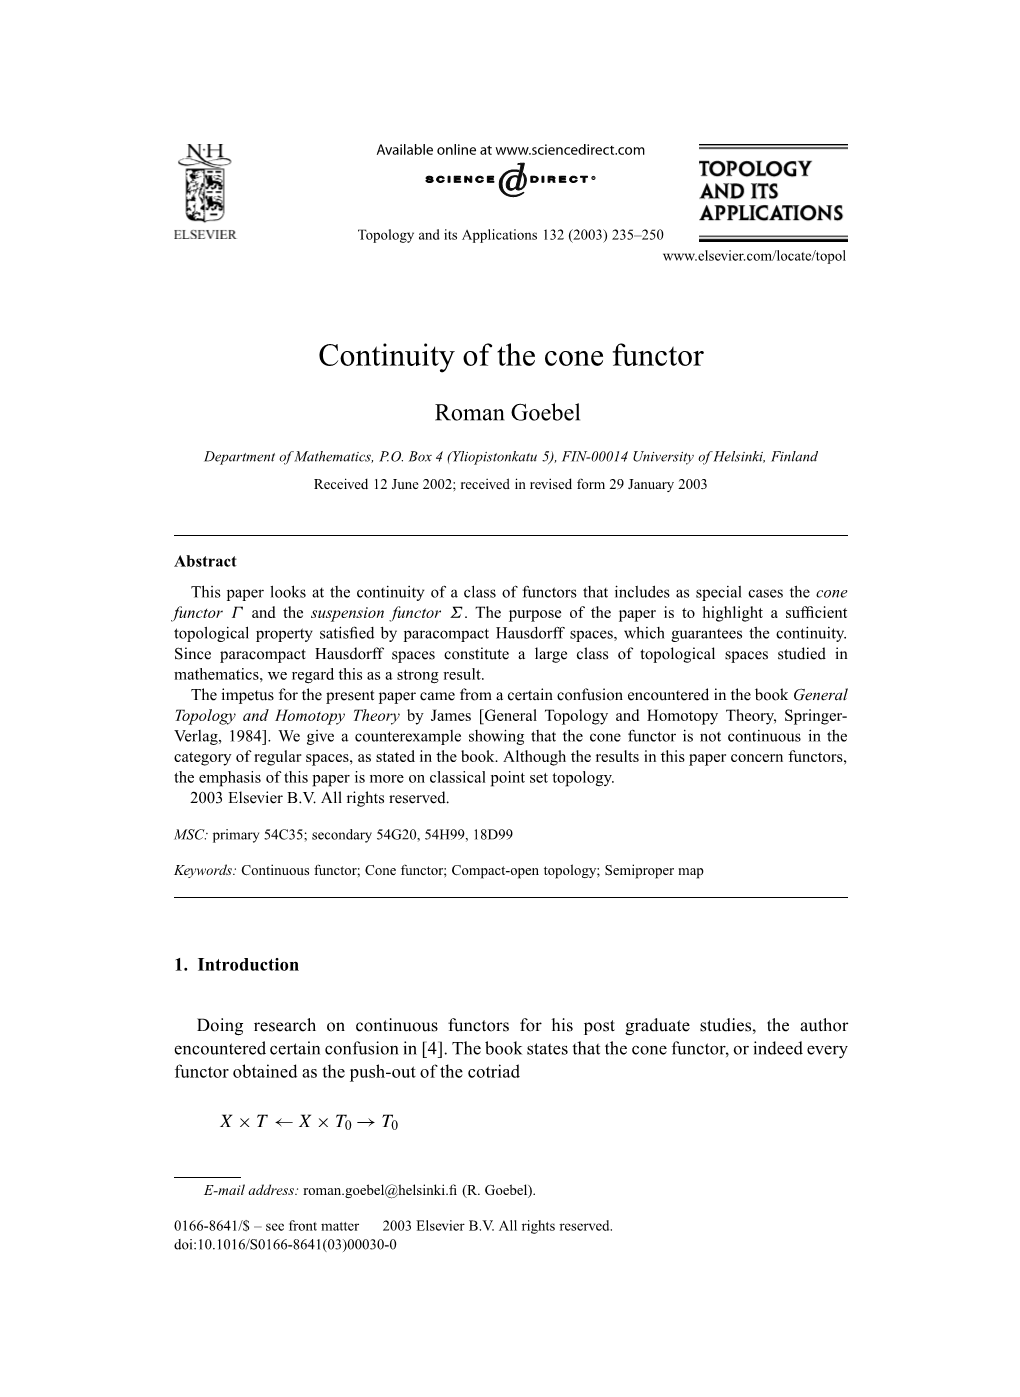 Continuity of the Cone Functor